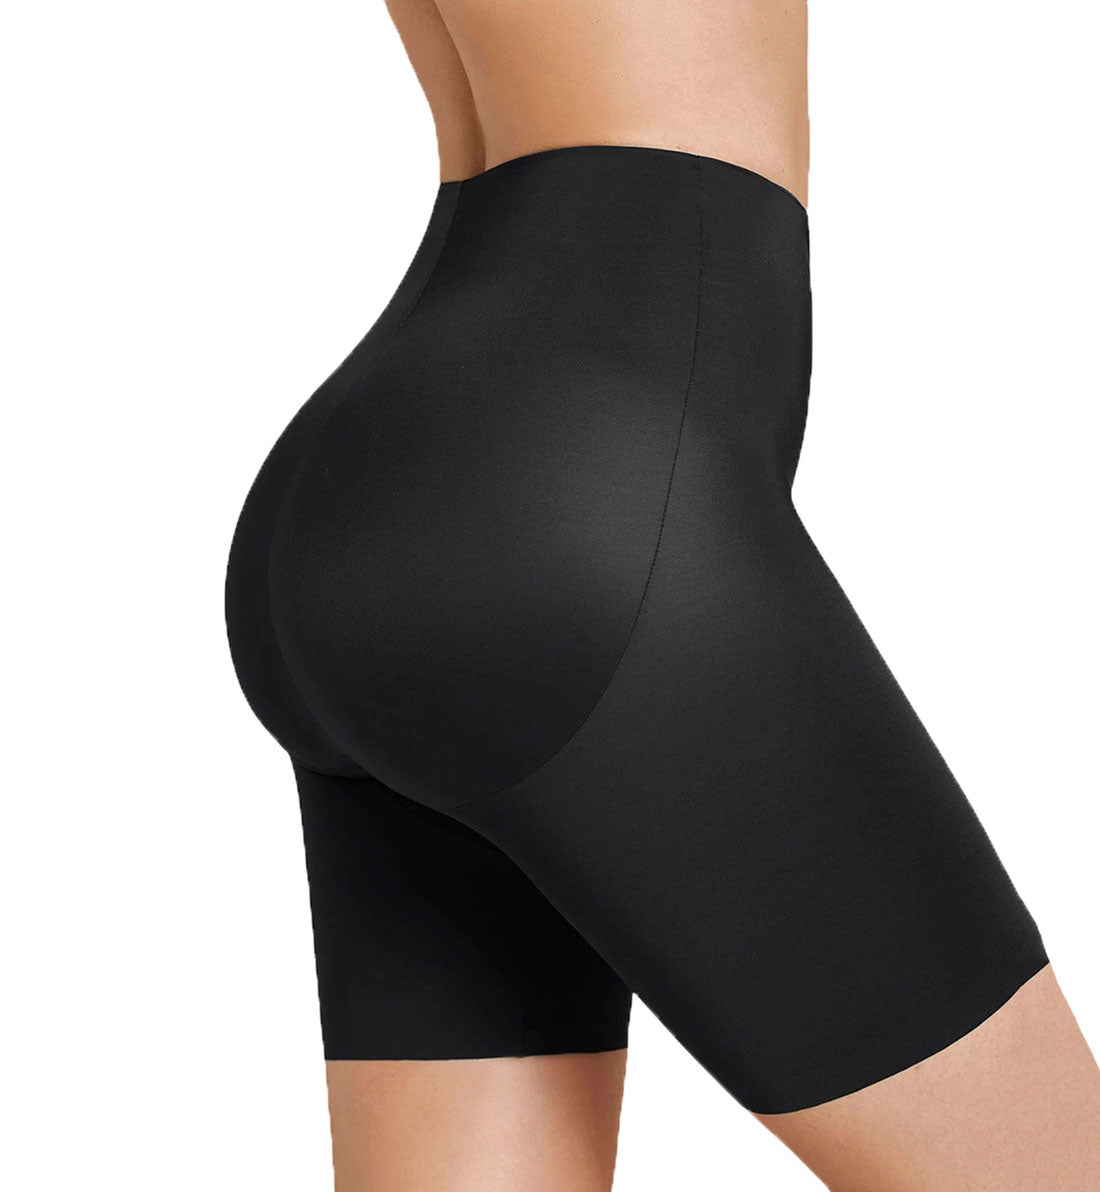 Leonisa High Waisted Compression Leggings for Women - Butt Lifting